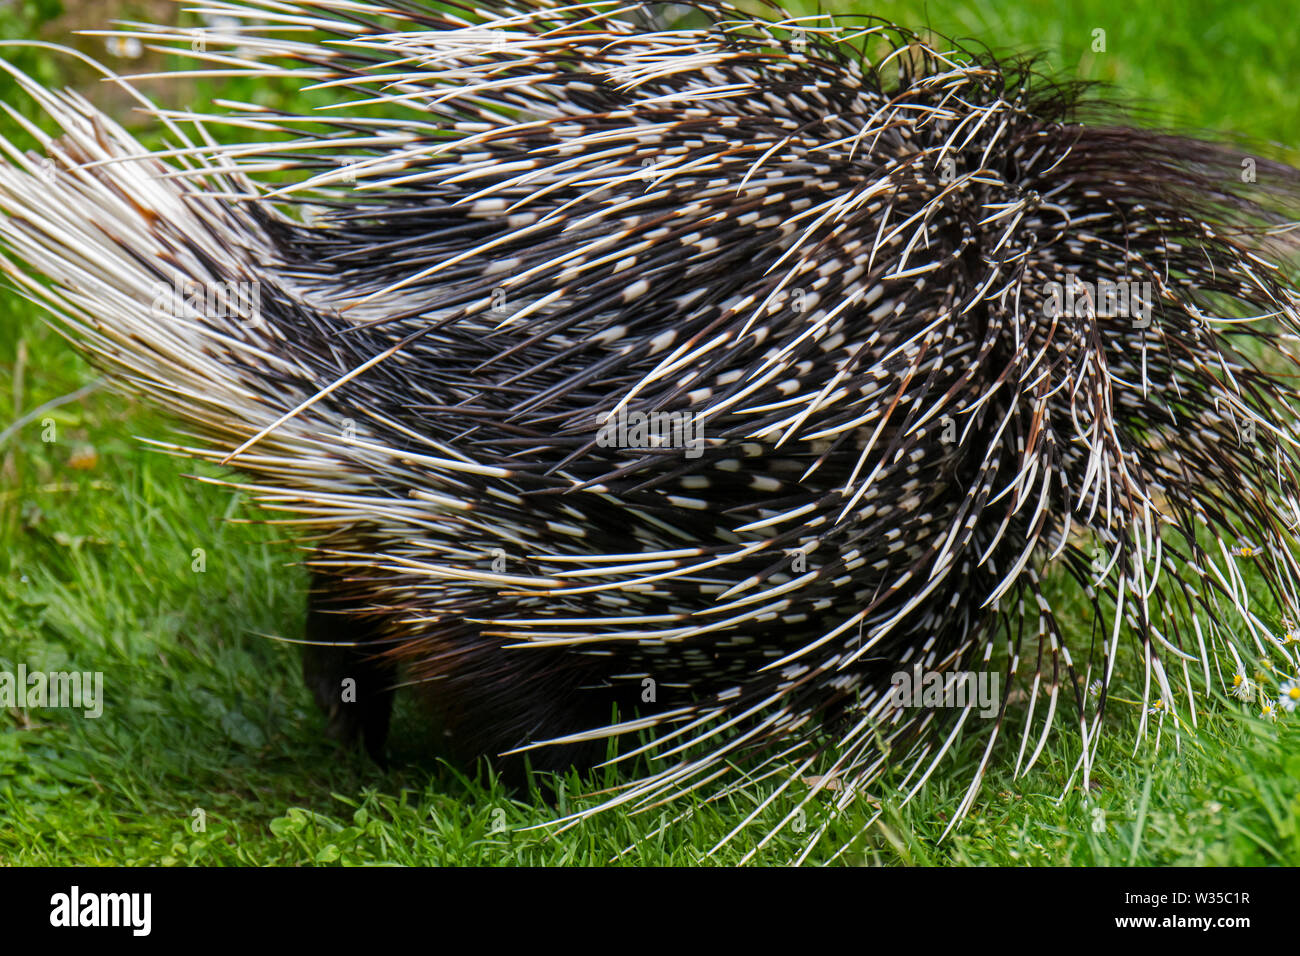 Crested porcupine (Hystrix cristata) showing backside with spiny quills, native to Italy, North Africa and sub-Saharan Africa Stock Photo